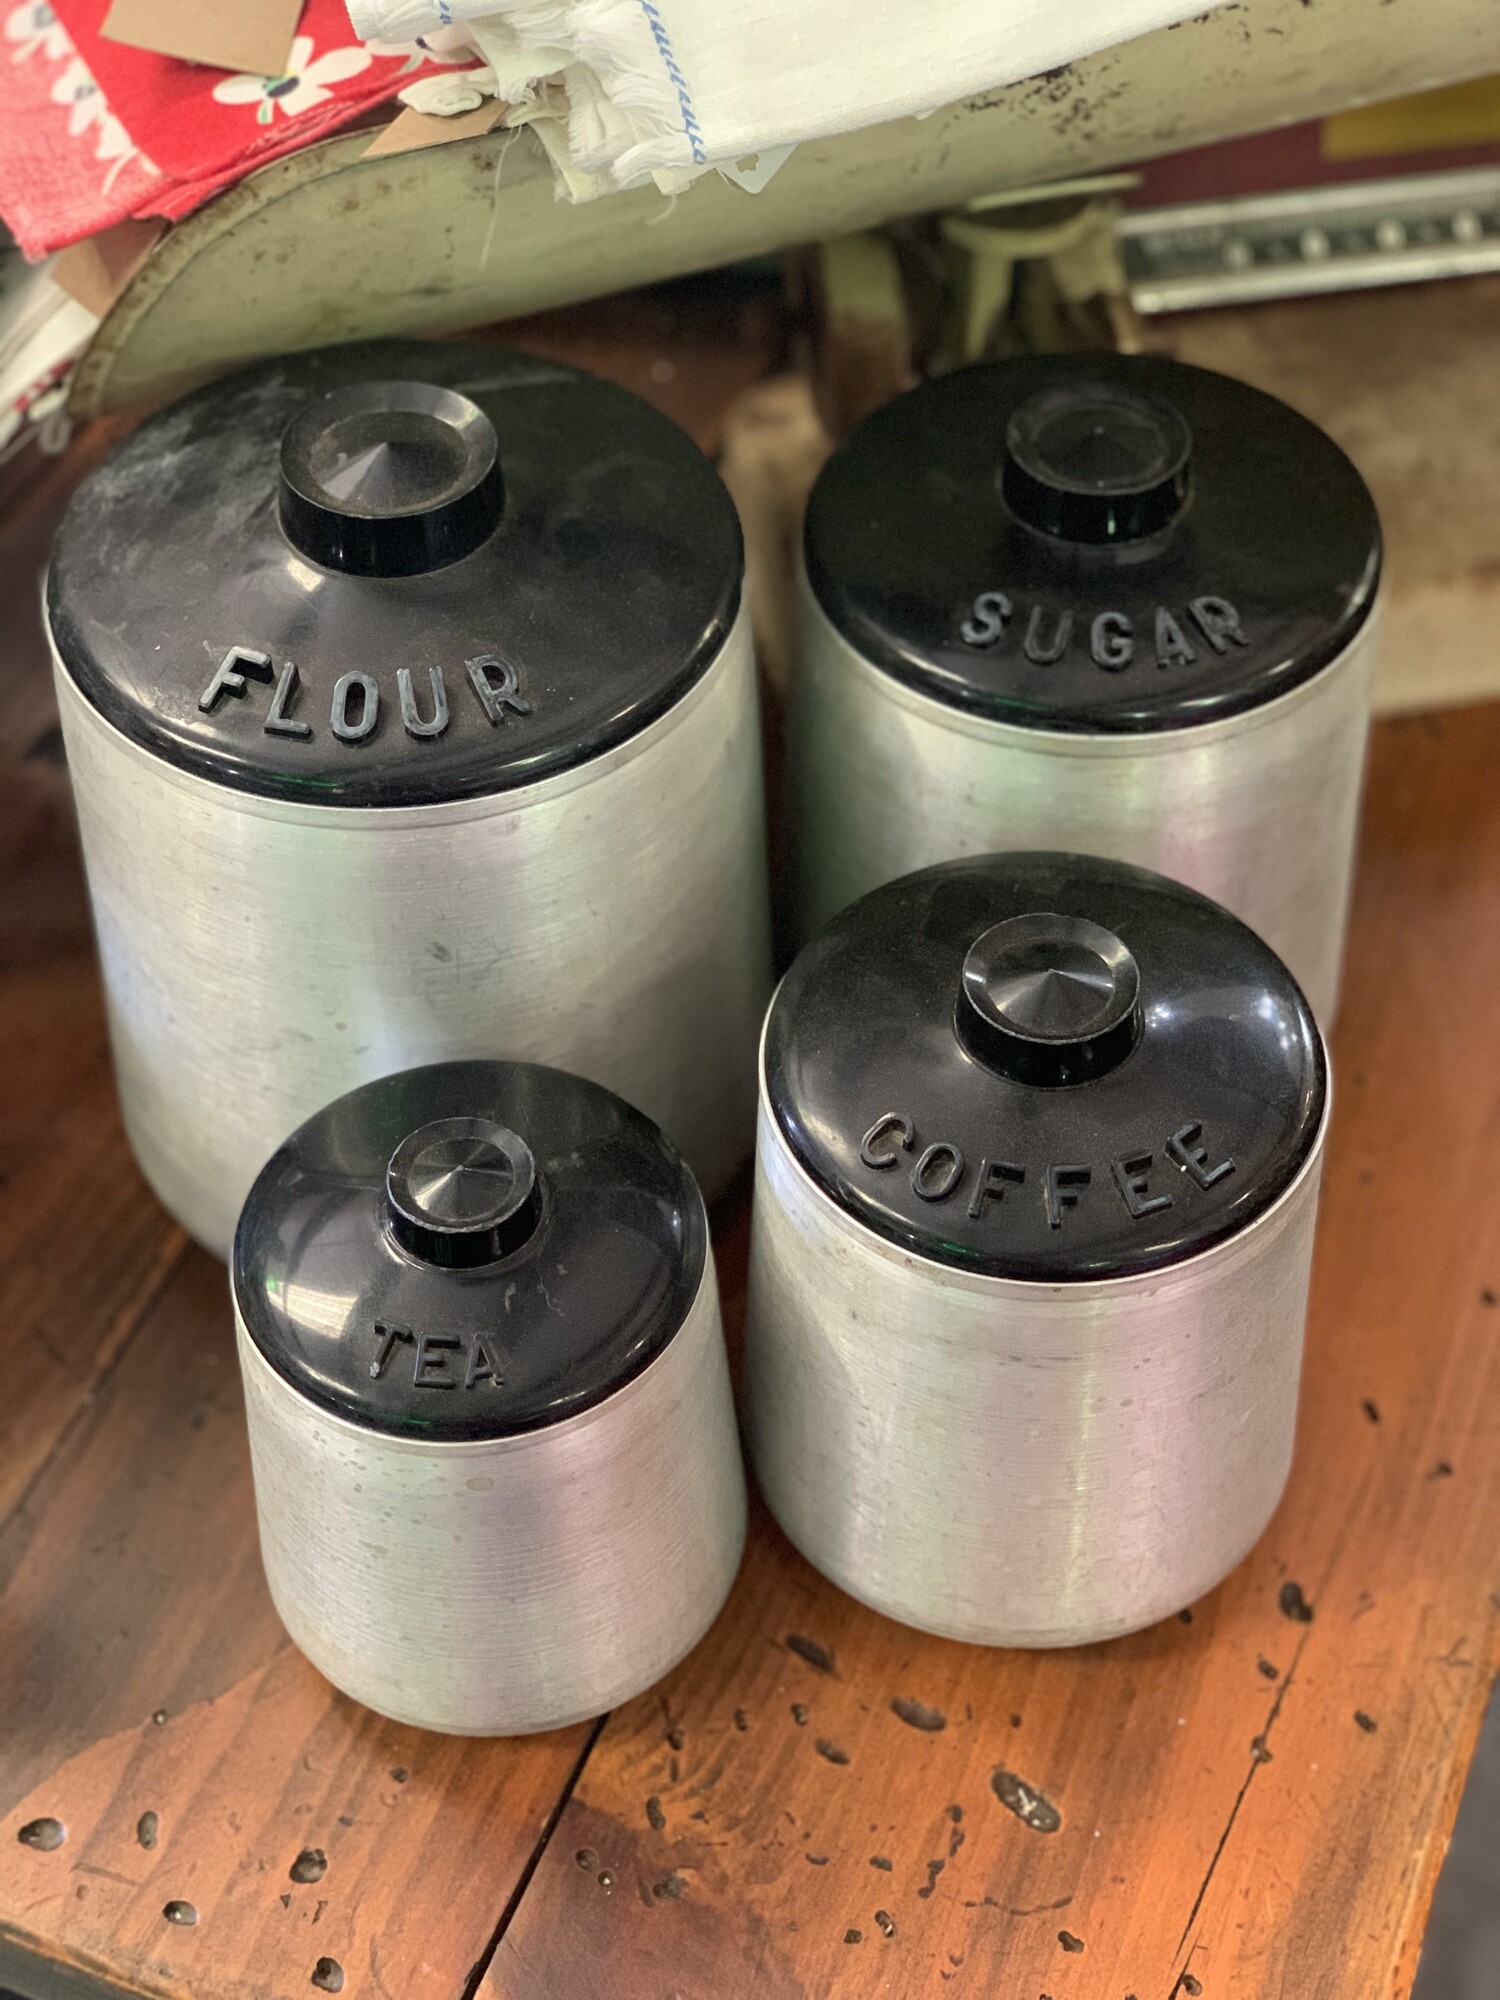 Sugar and Flour Canister Set